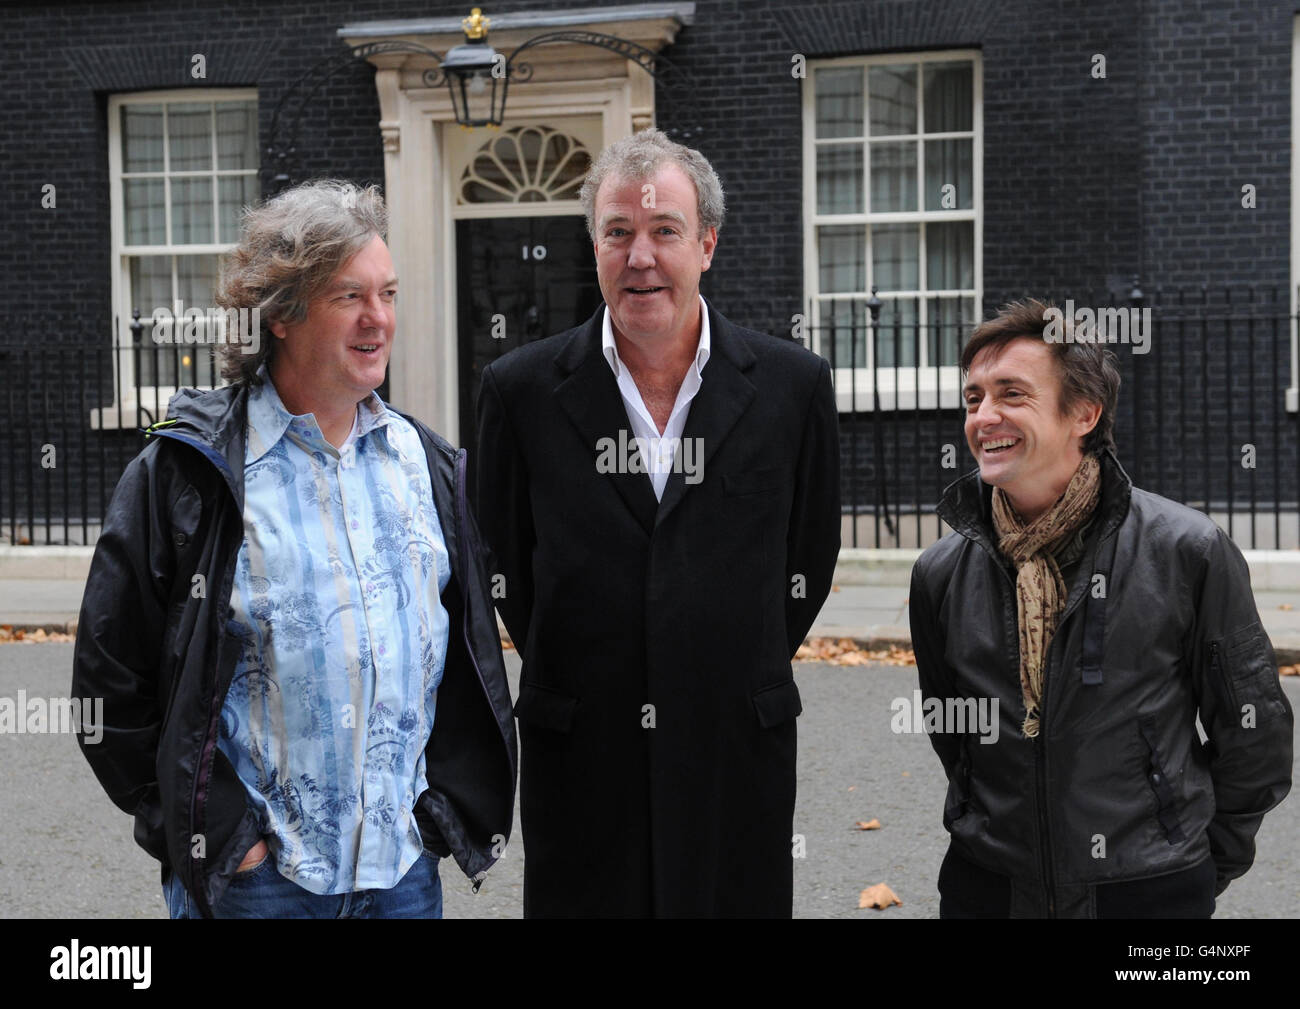 Presenters of the television car show Top Gear from left James May, Jeremy Clarkson and Richard Hammond outside 10 Downing Street in London, where they were filming an episode of the BBC's Top Gear show. Stock Photo